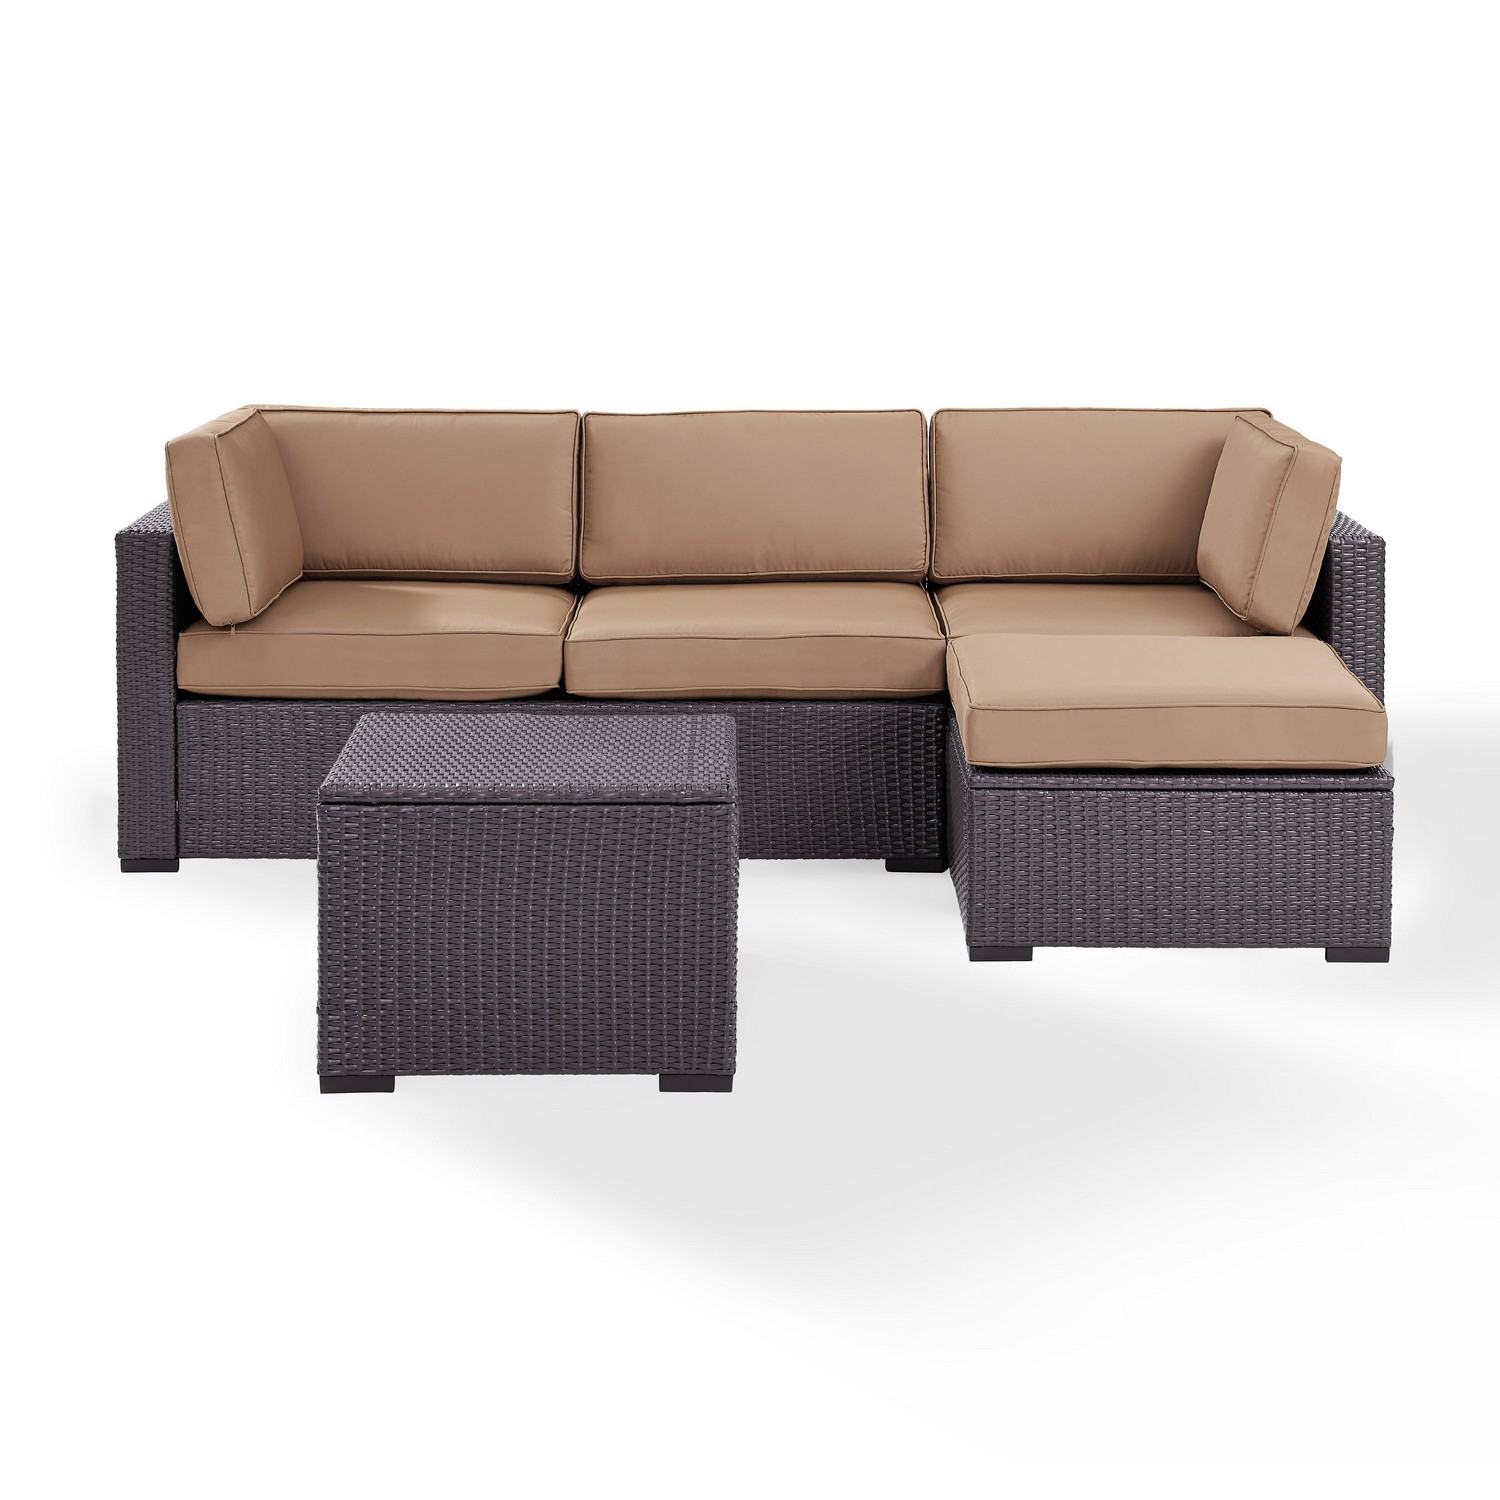 Crosley Biscayne 4-PC Outdoor Wicker Sectional Set - Loveseat, Corner Chair, Ottoman, Coffee Table - Mocha/Brown